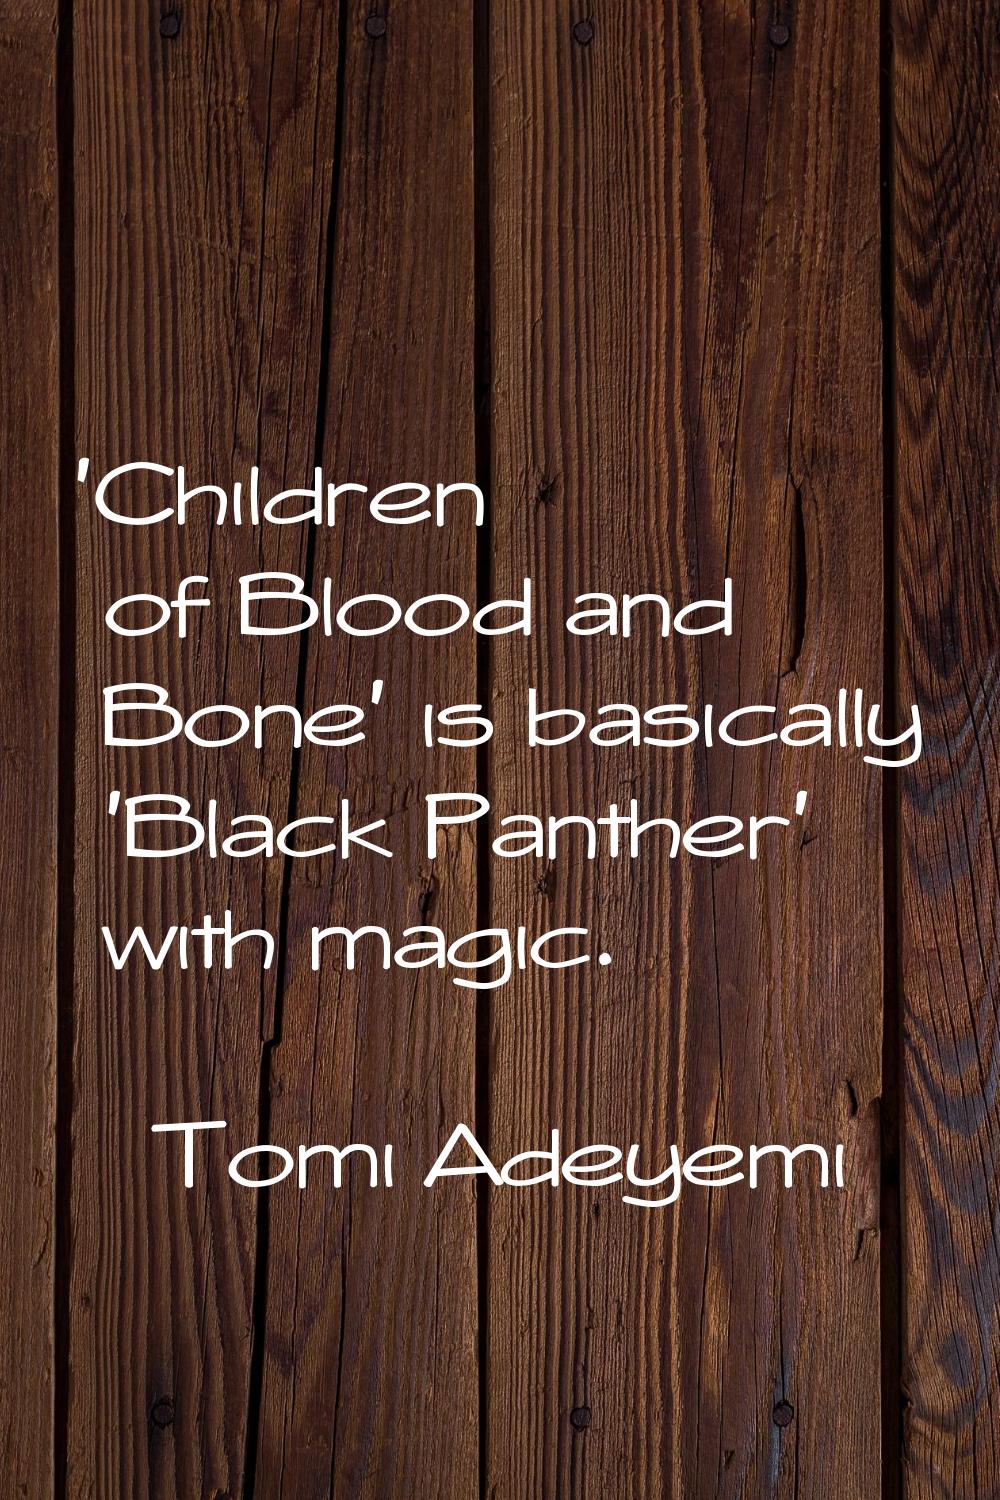 'Children of Blood and Bone' is basically 'Black Panther' with magic.